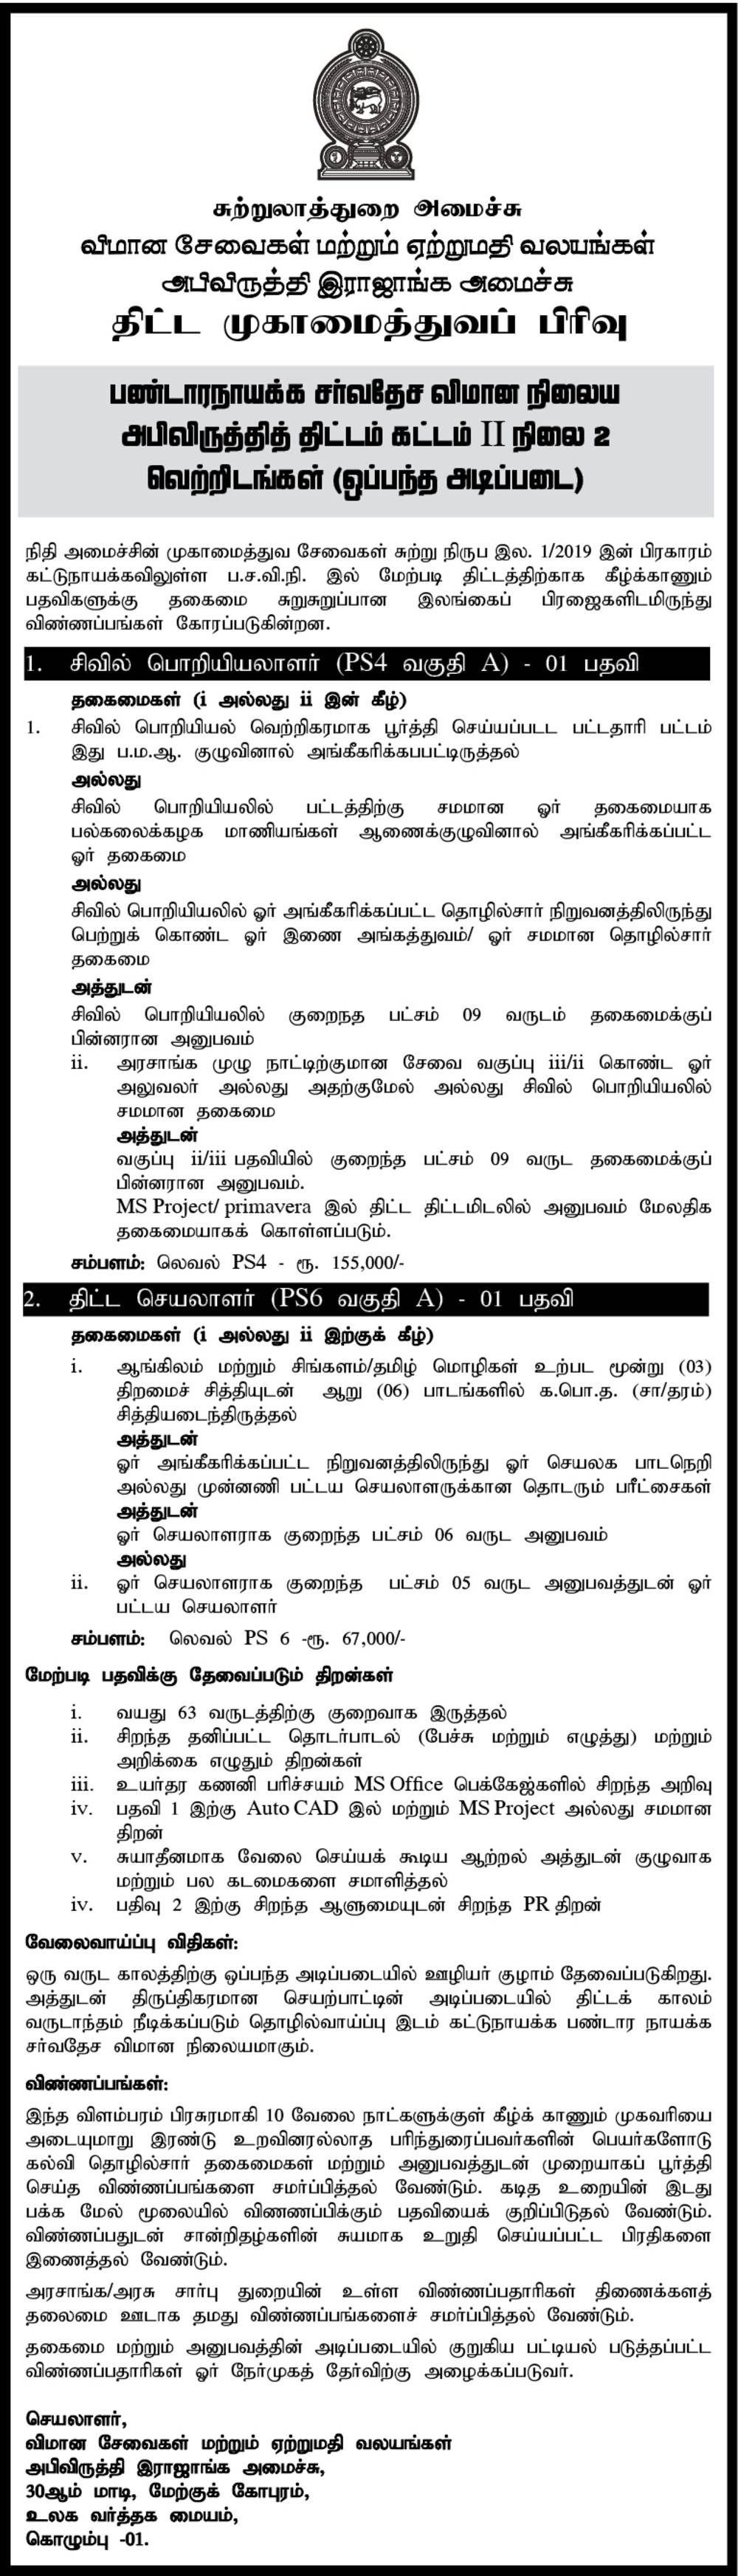 Civil Engineer & Project Secretary Vacancies Ministry of Tourism Tamil